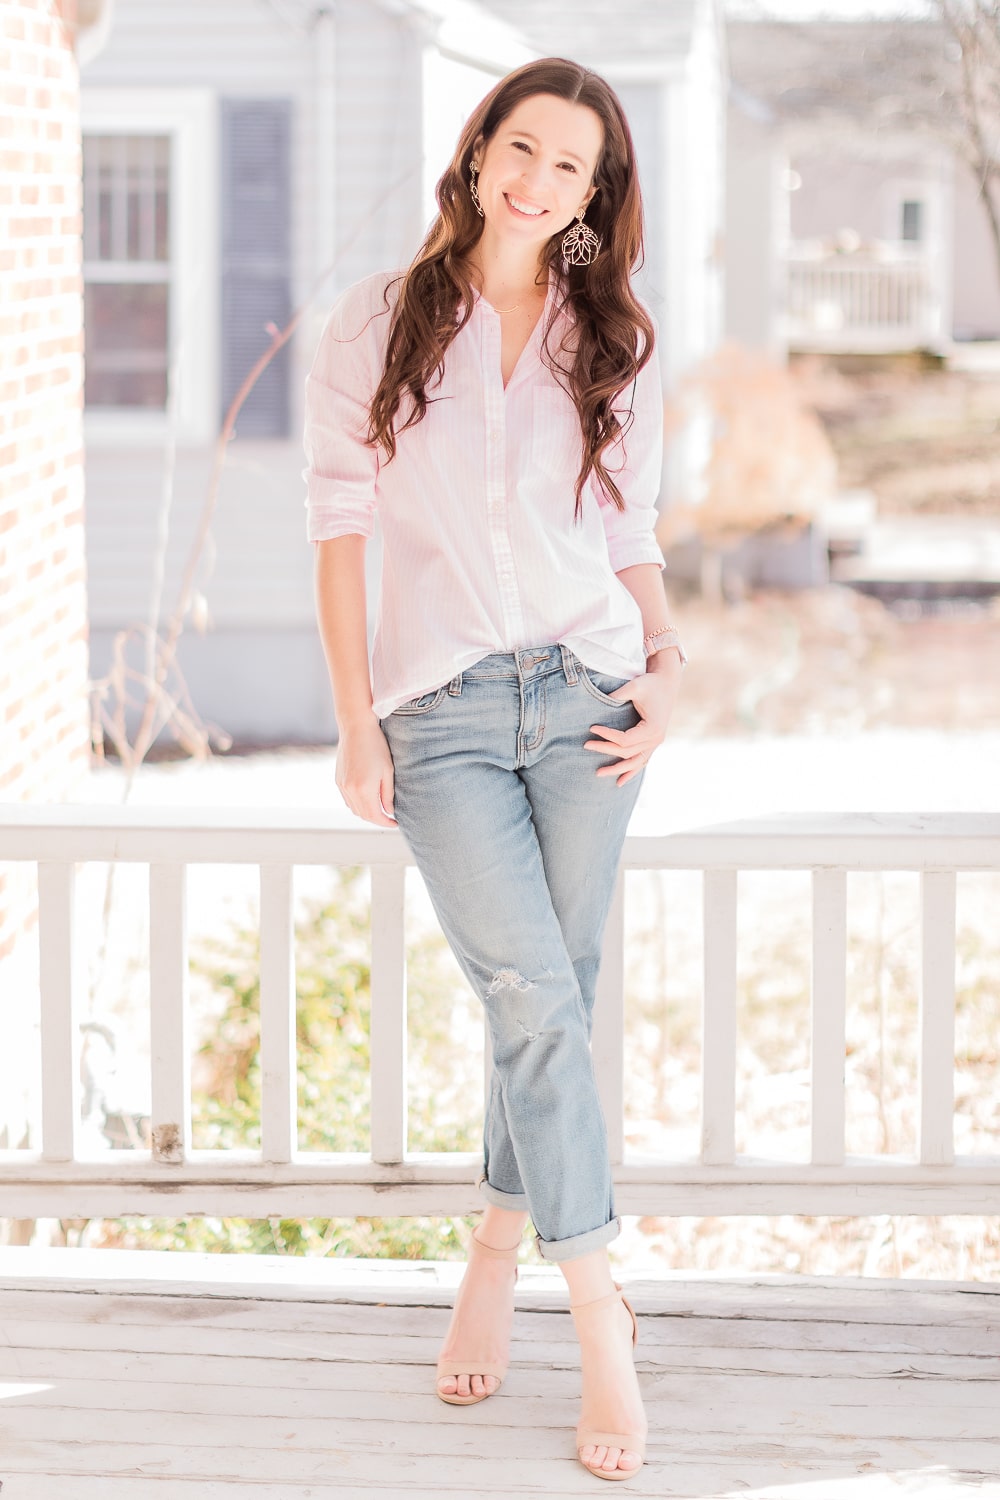 Affordable fashion blogger Stephanie Ziajka of Diary of a Debutante shows how to wear girlfriend jeans